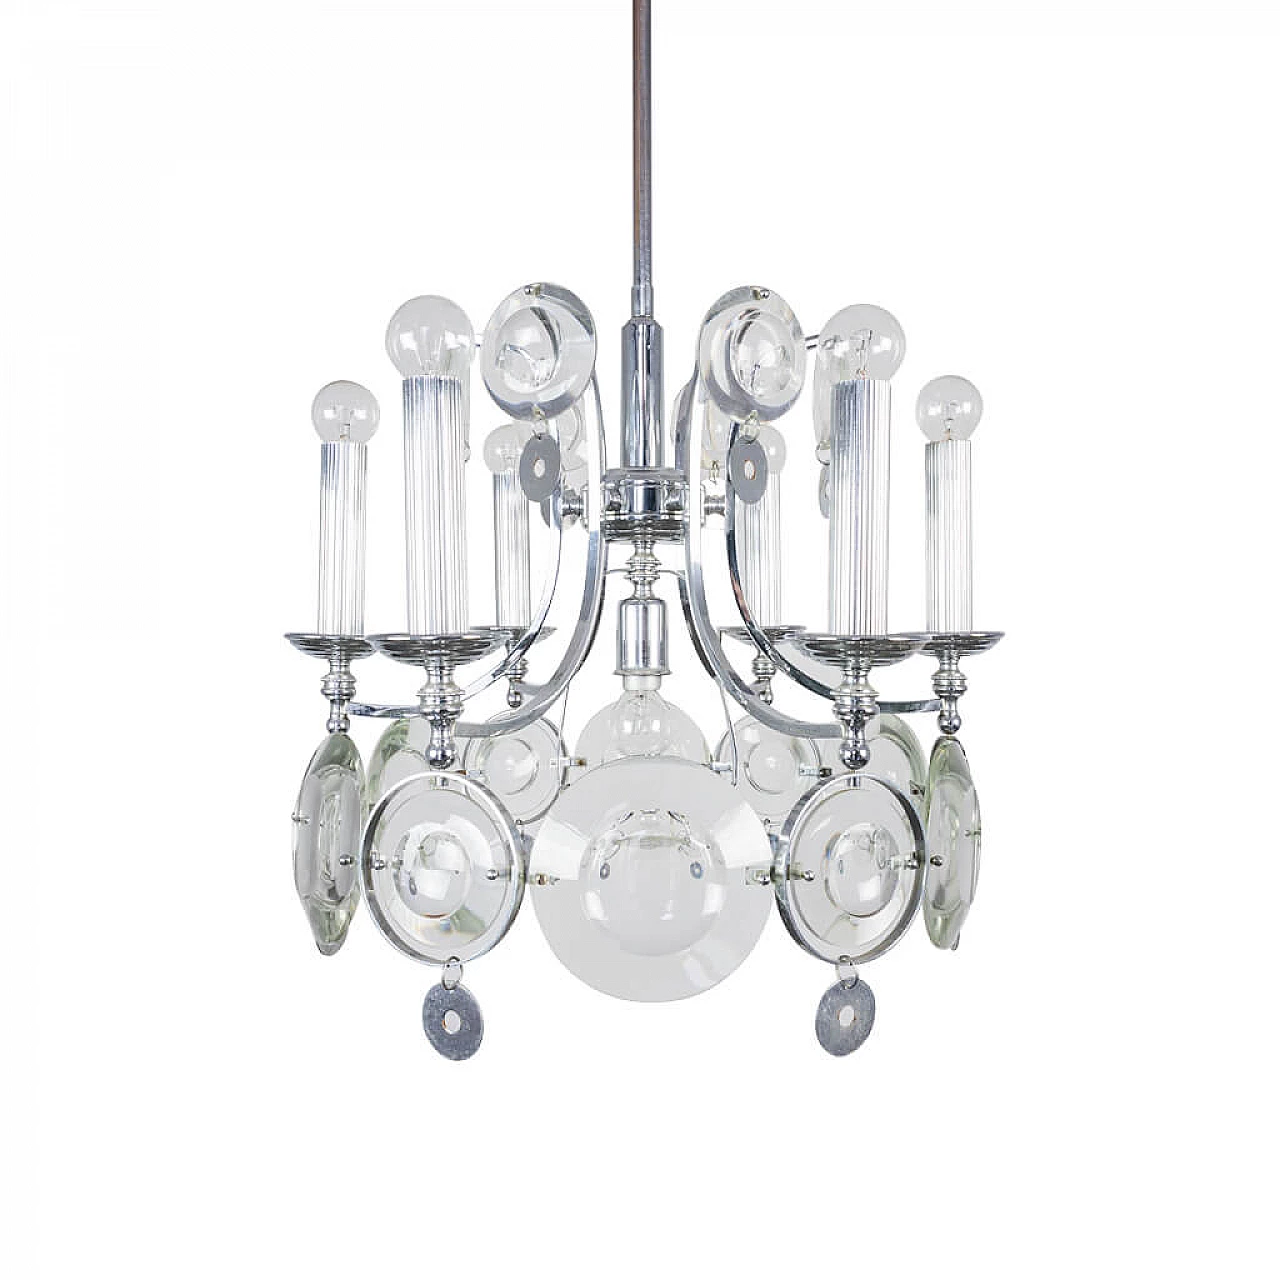 Chandelier with 7 lights in chromed steel and glass, 70s 1237359